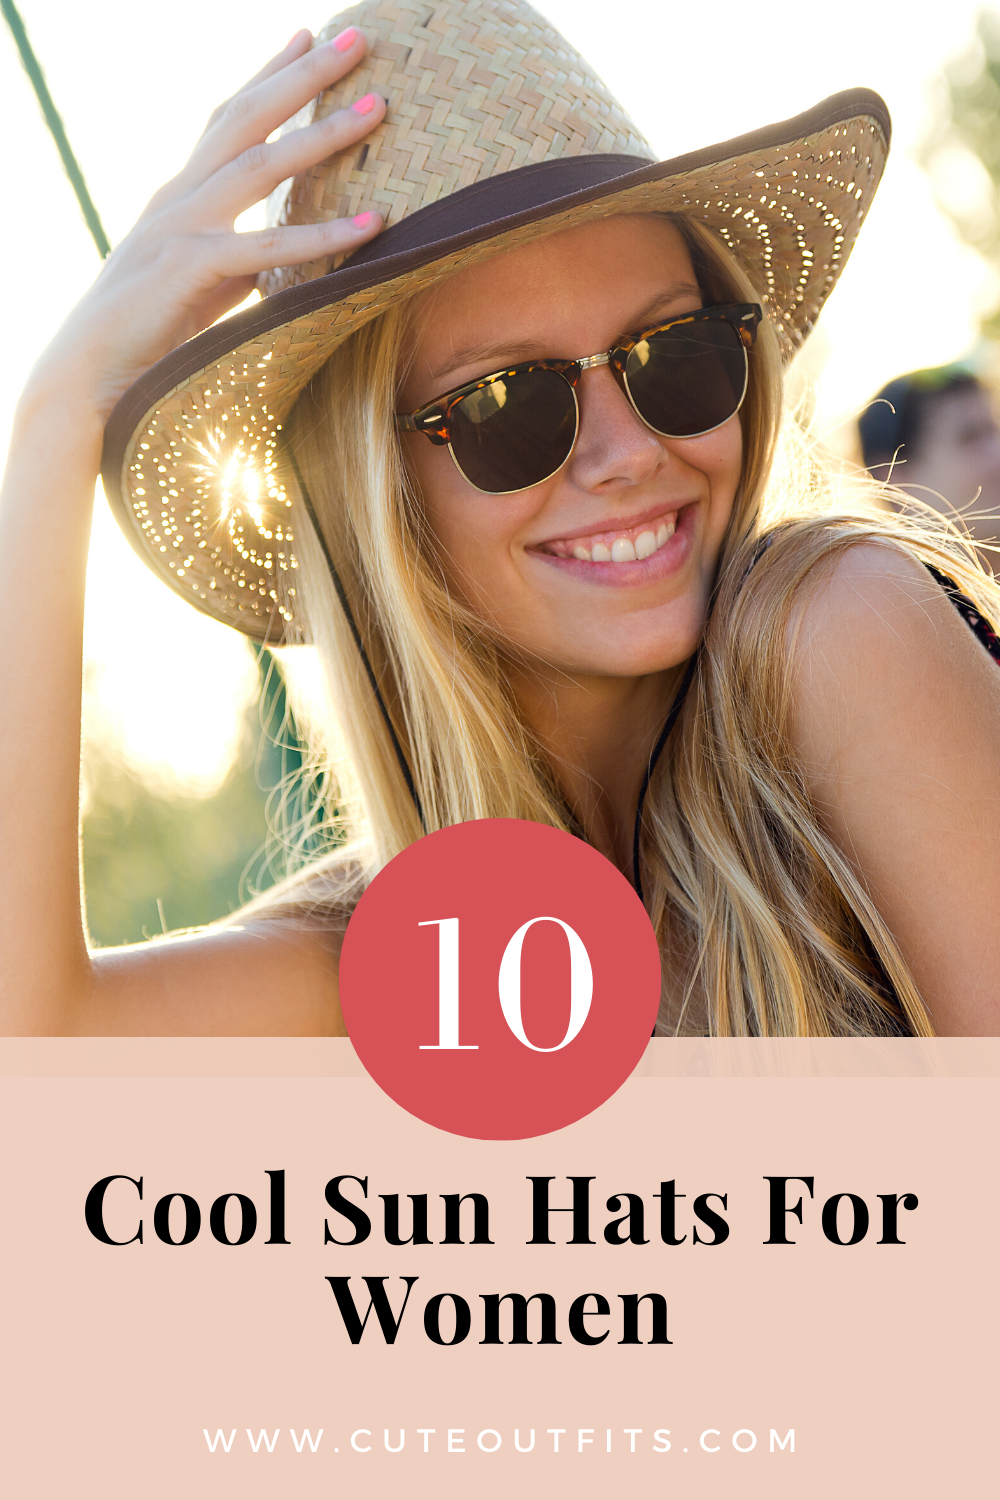 placard | Strut Under The Hot Sun With These 10 Cool Sun Hats For Women